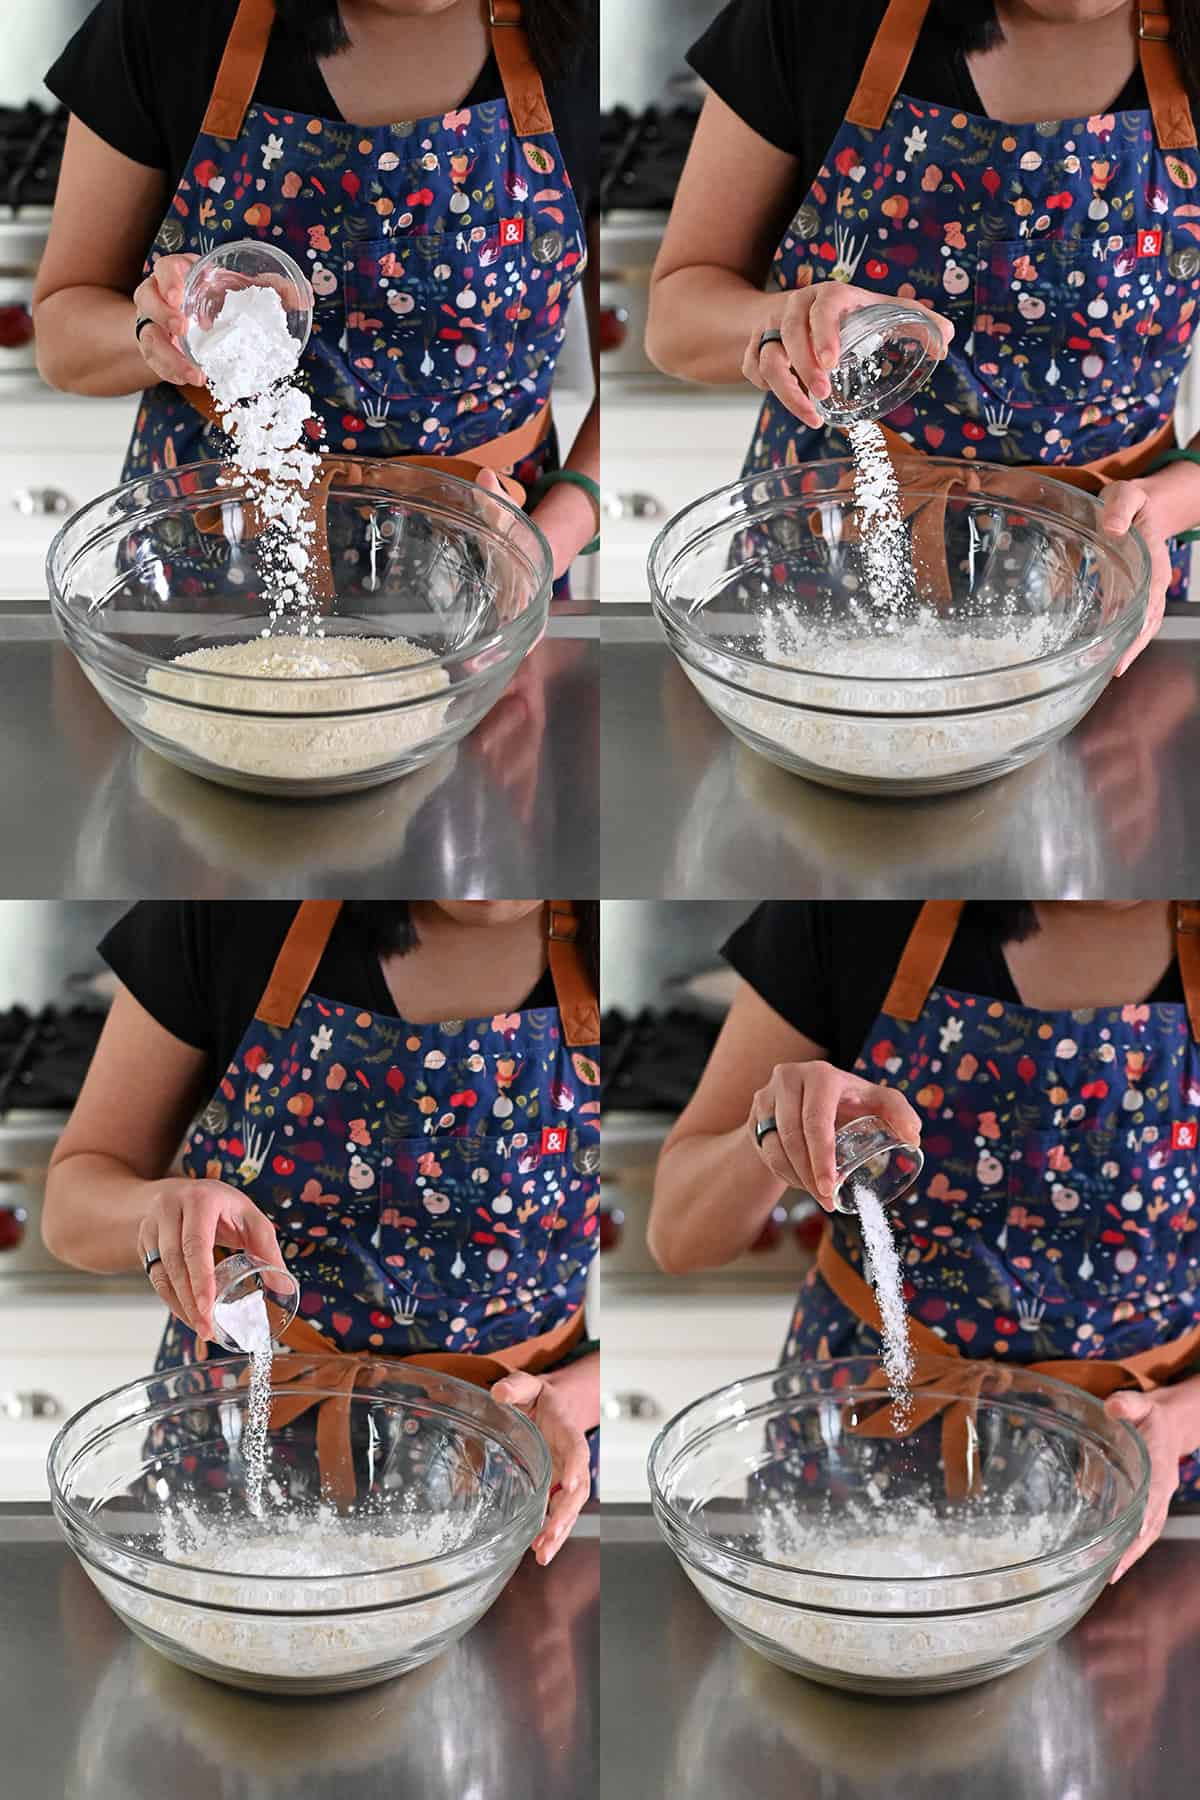 Combiing almond flour, tapioca starch, cream of tartar, and baking soda into a large glass mixing bowl.